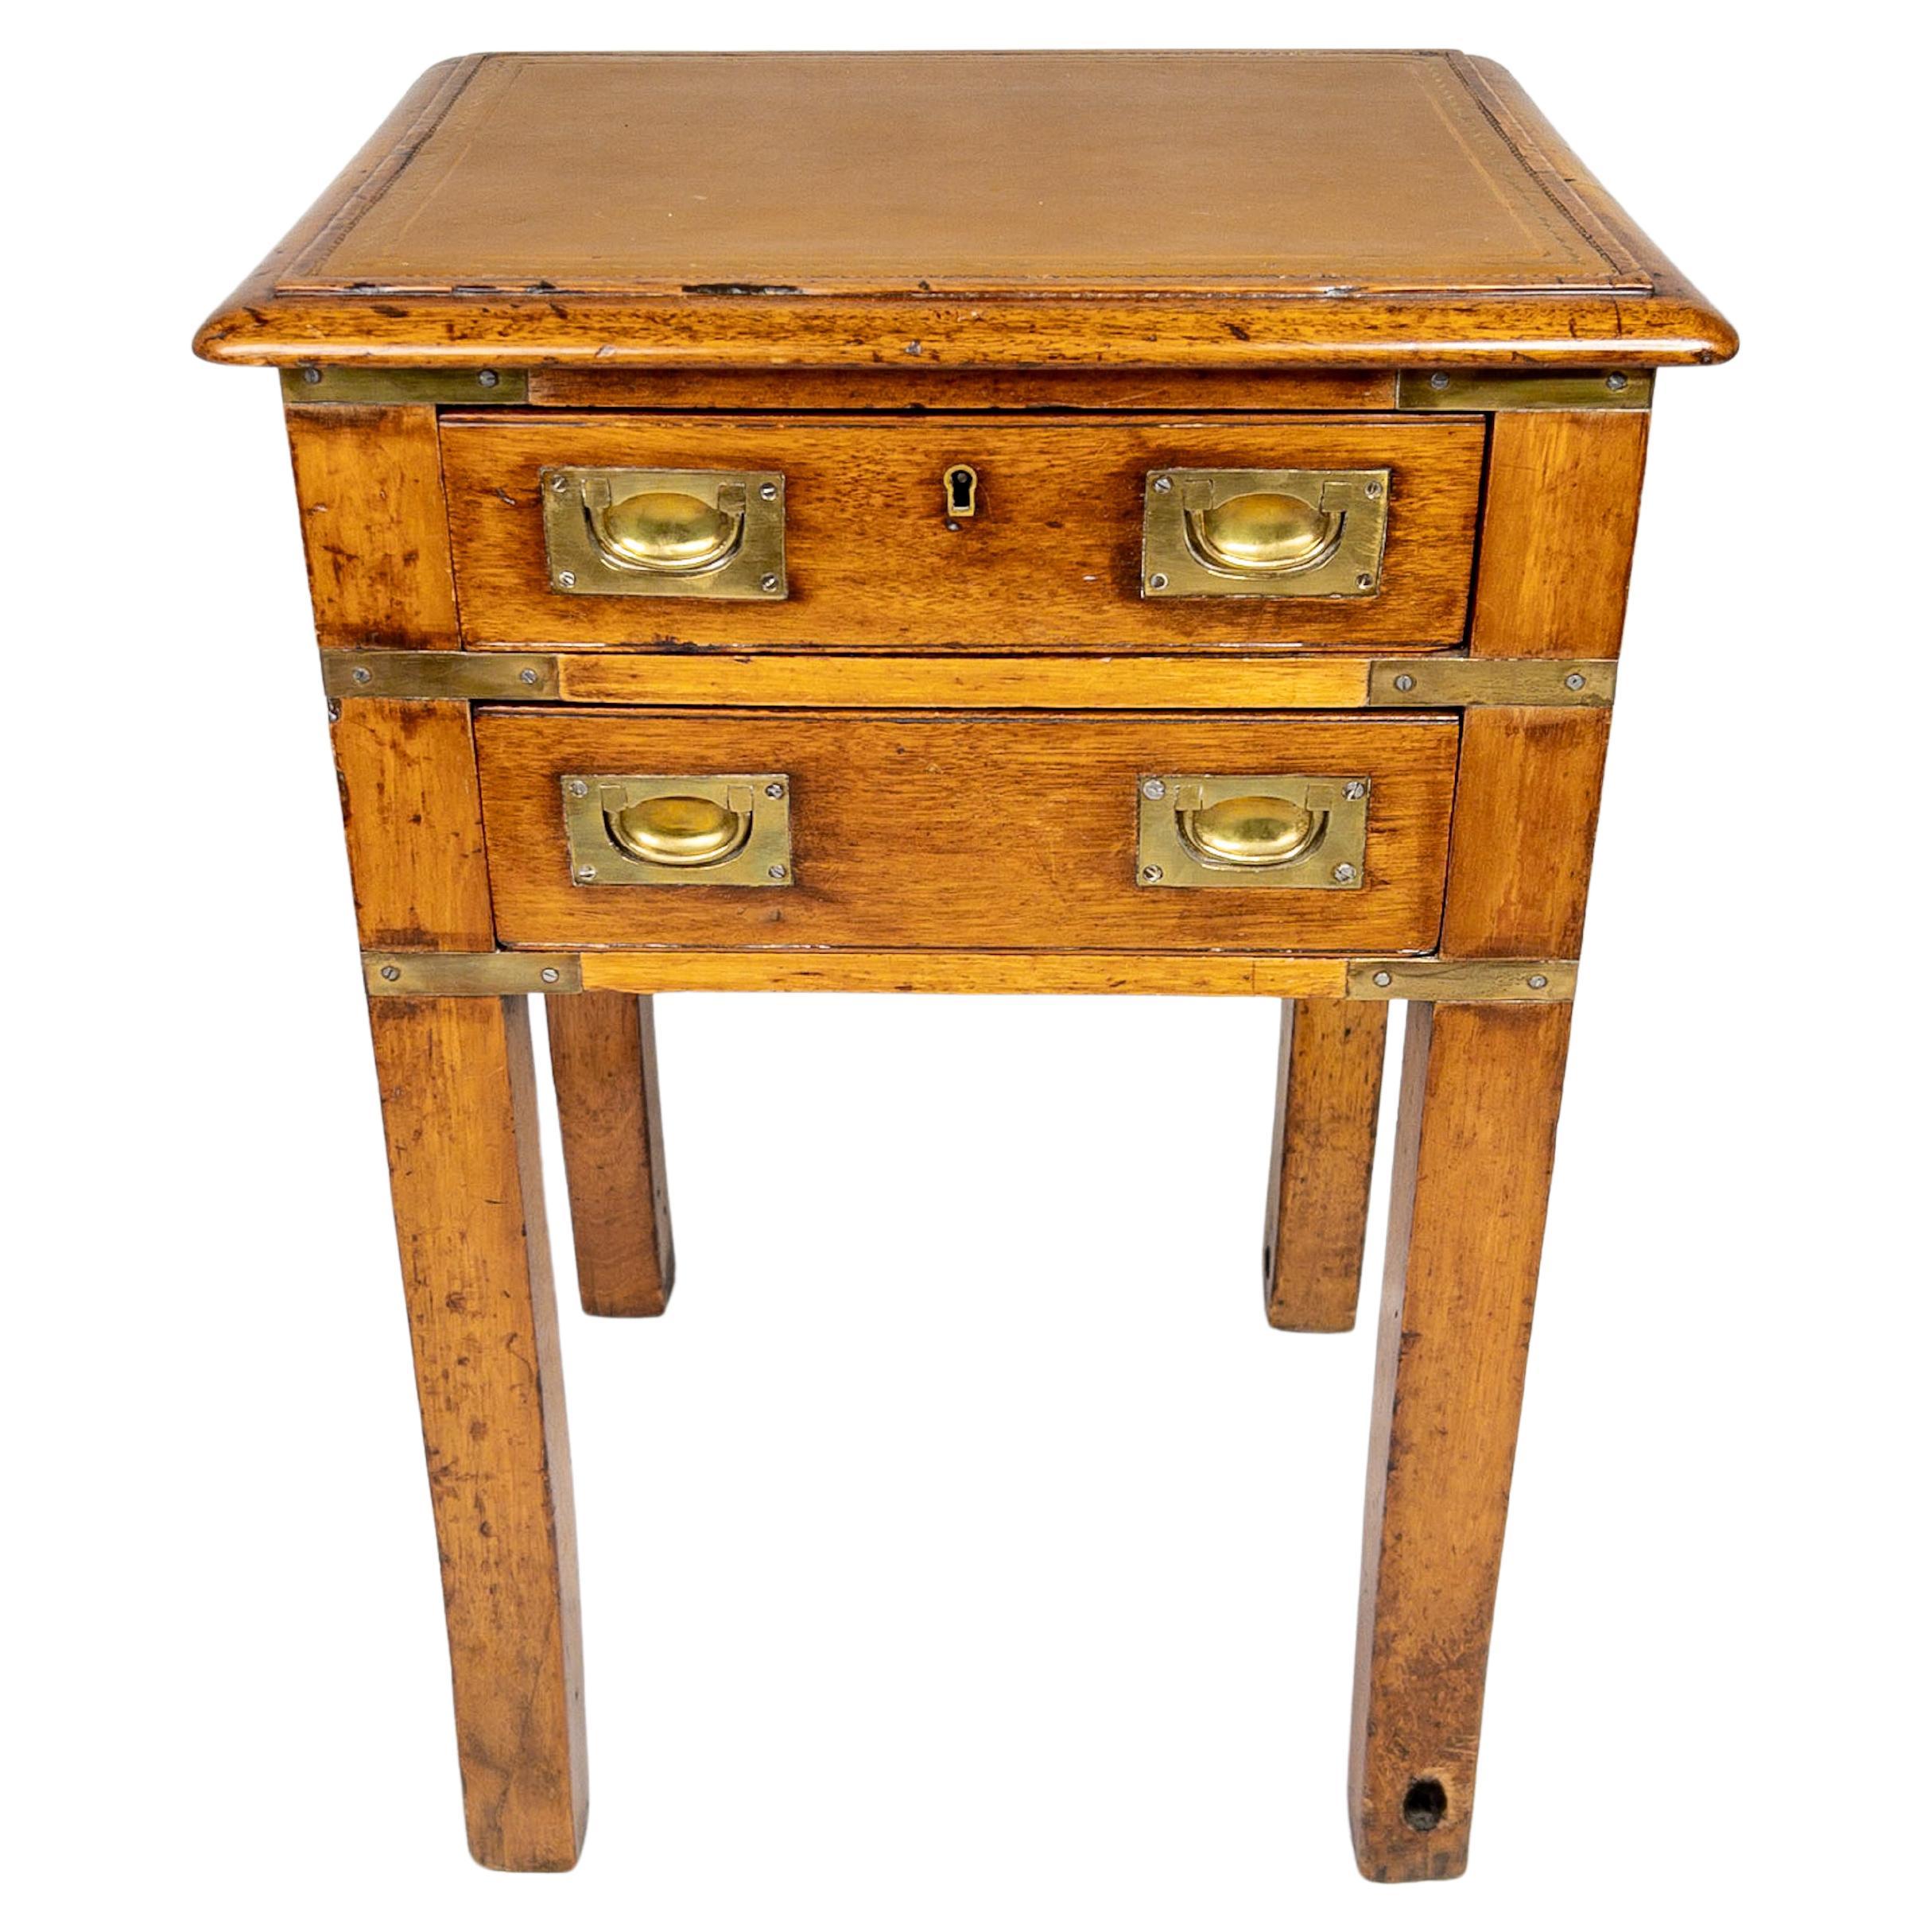 Rare 19th Century French Campaign Chest on Legs For Sale